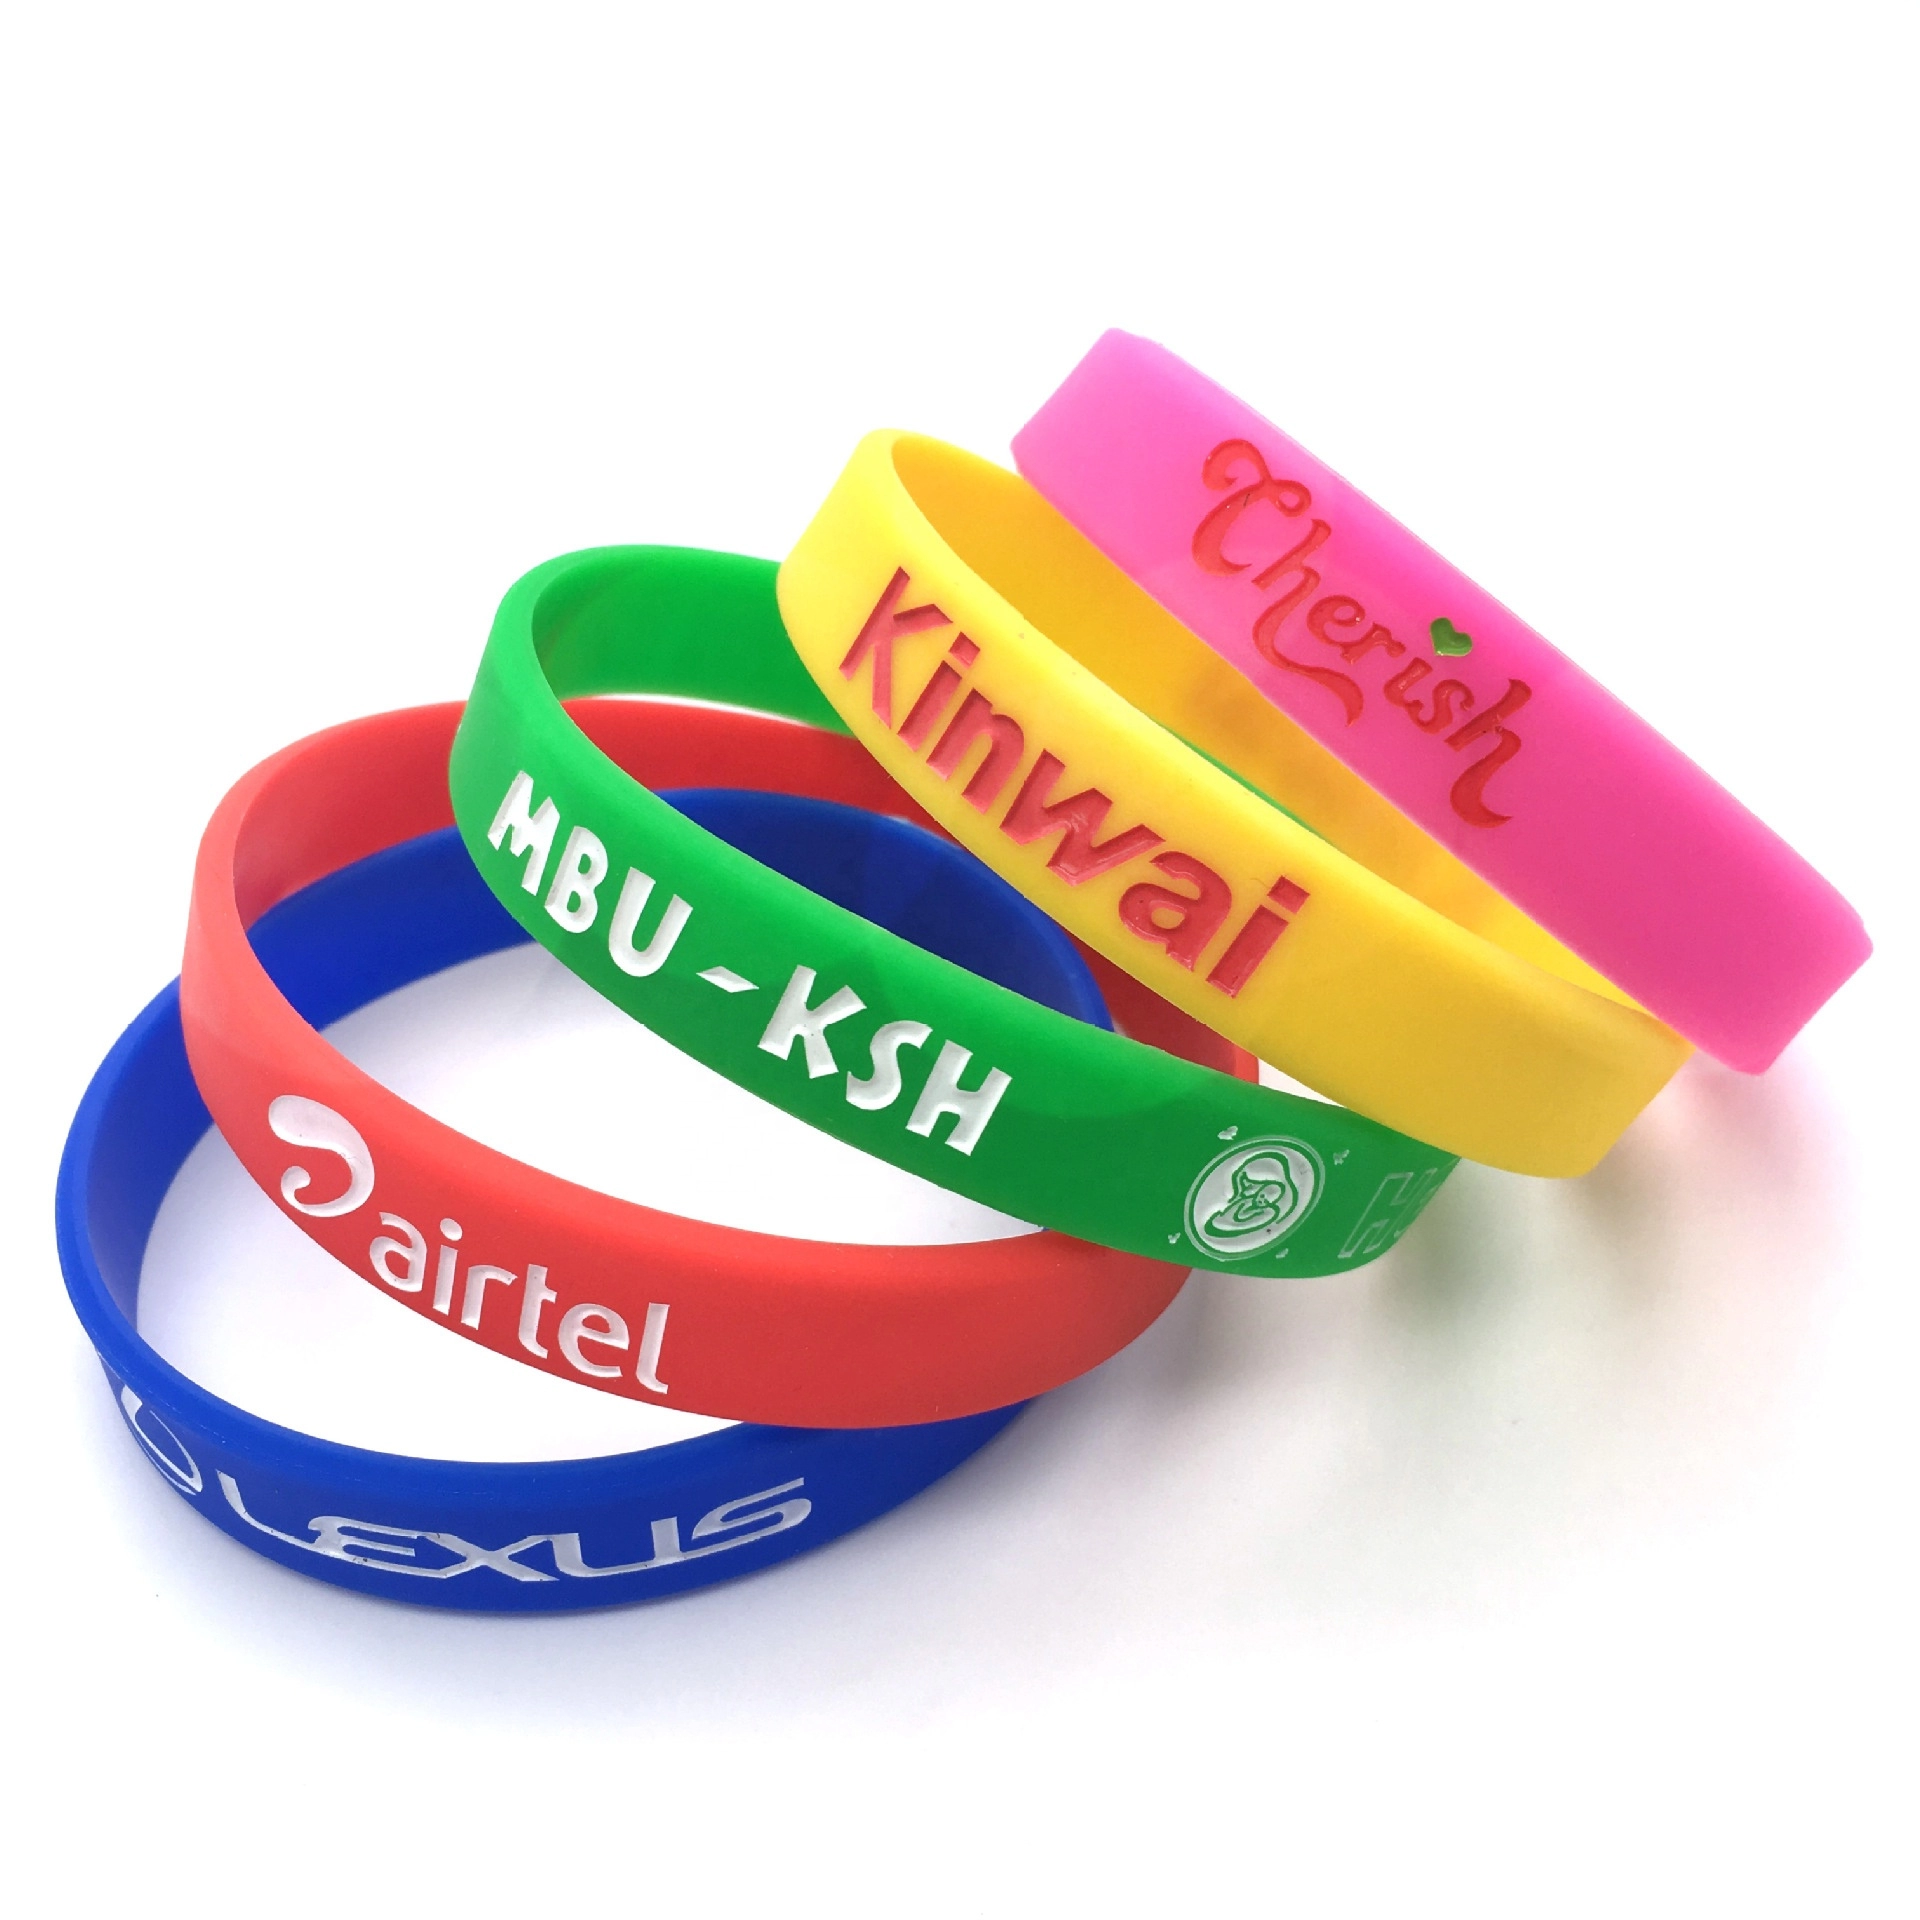 Custom Silicone Bracelets, Make Your Own Rubber Wristbands With Message or Logo, High Quality Personalized Wrist Band